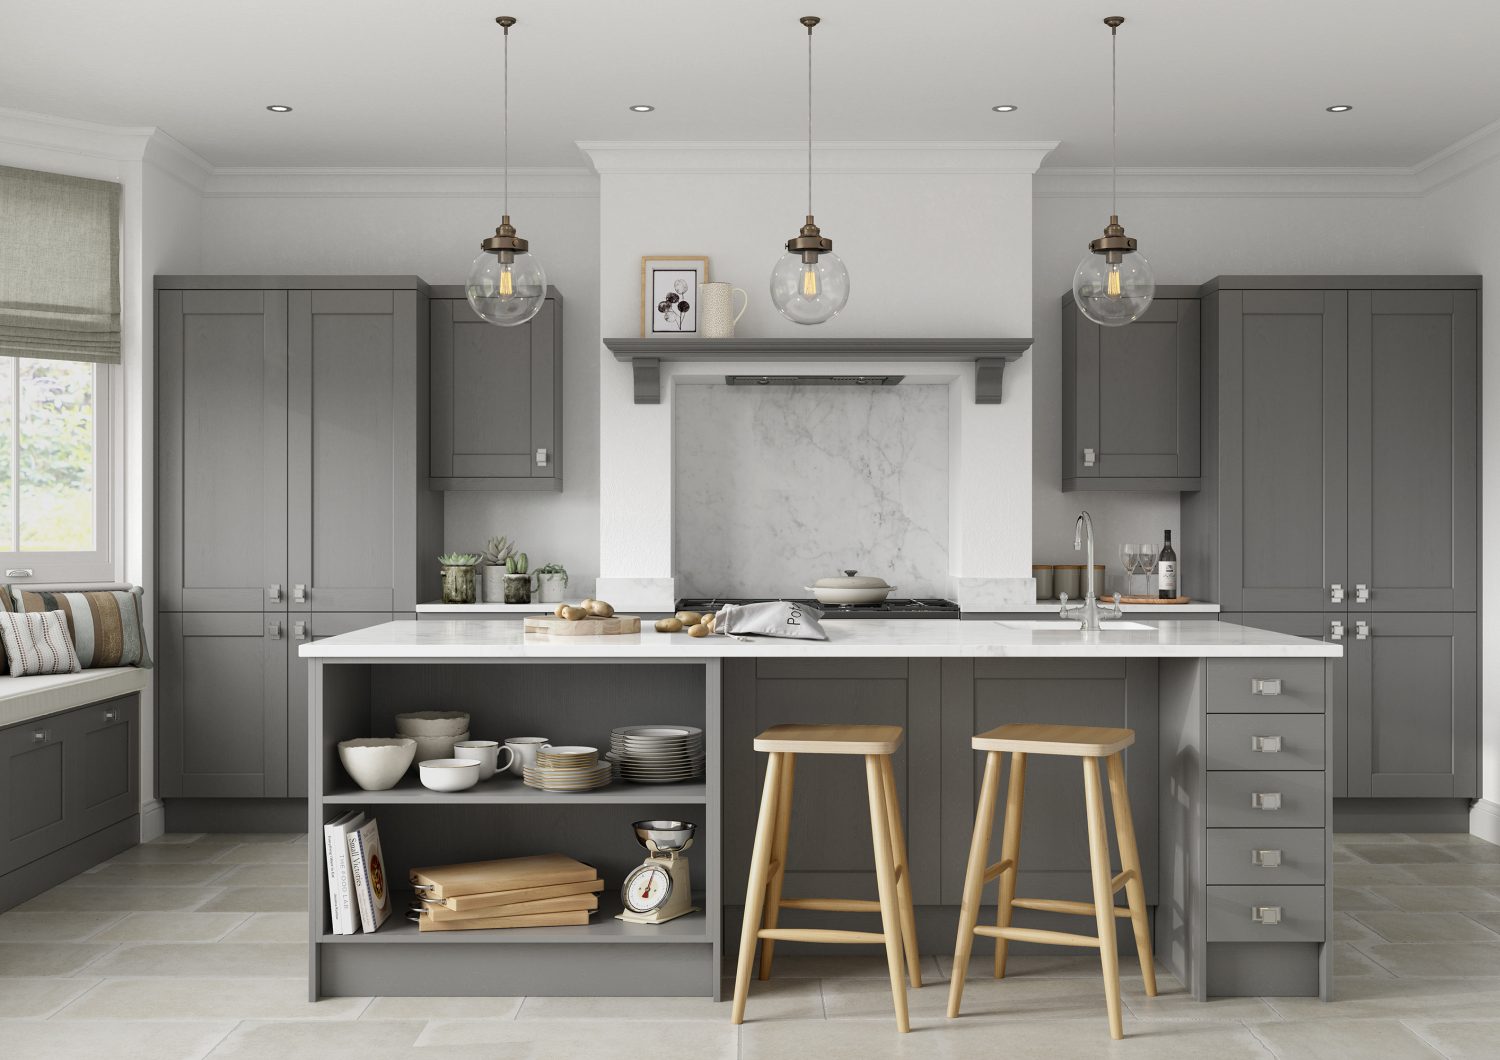 The Kendal Dust Grey shaker kitchen, with prominent V-Groove doors, made by The Kitchen Depot